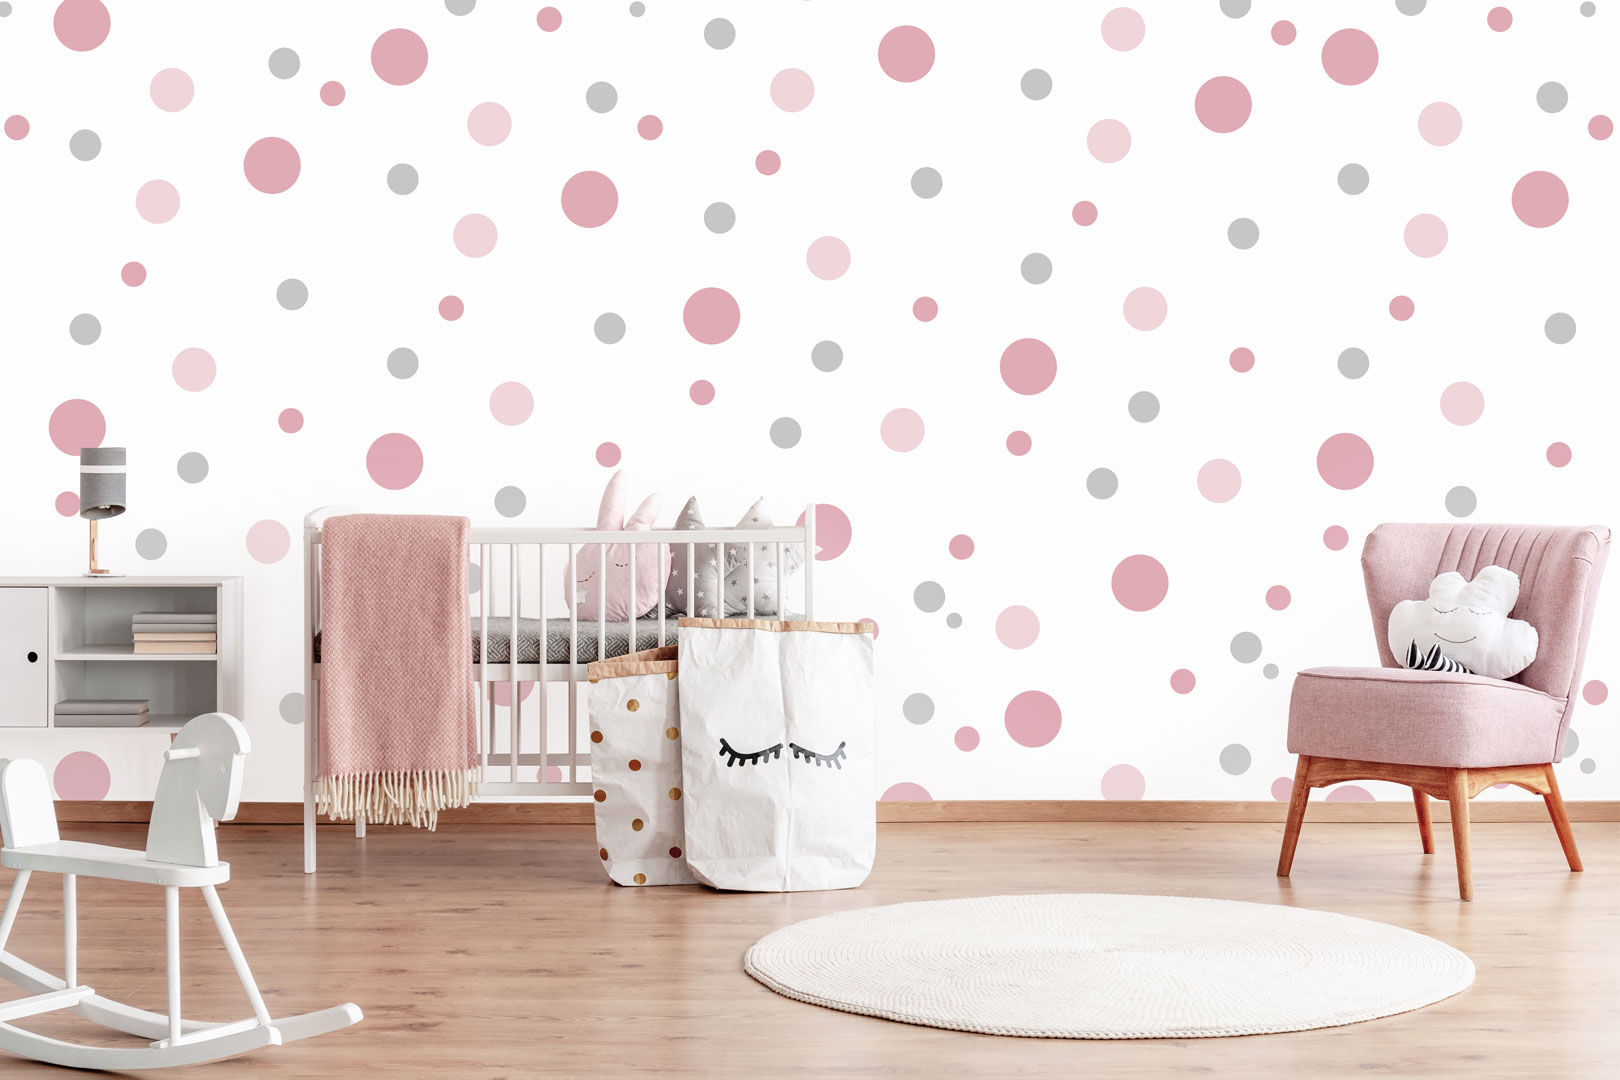 Pastel wallpaper for baby's room with pink and grey bubbles, circles, dots - Dekoori image 3